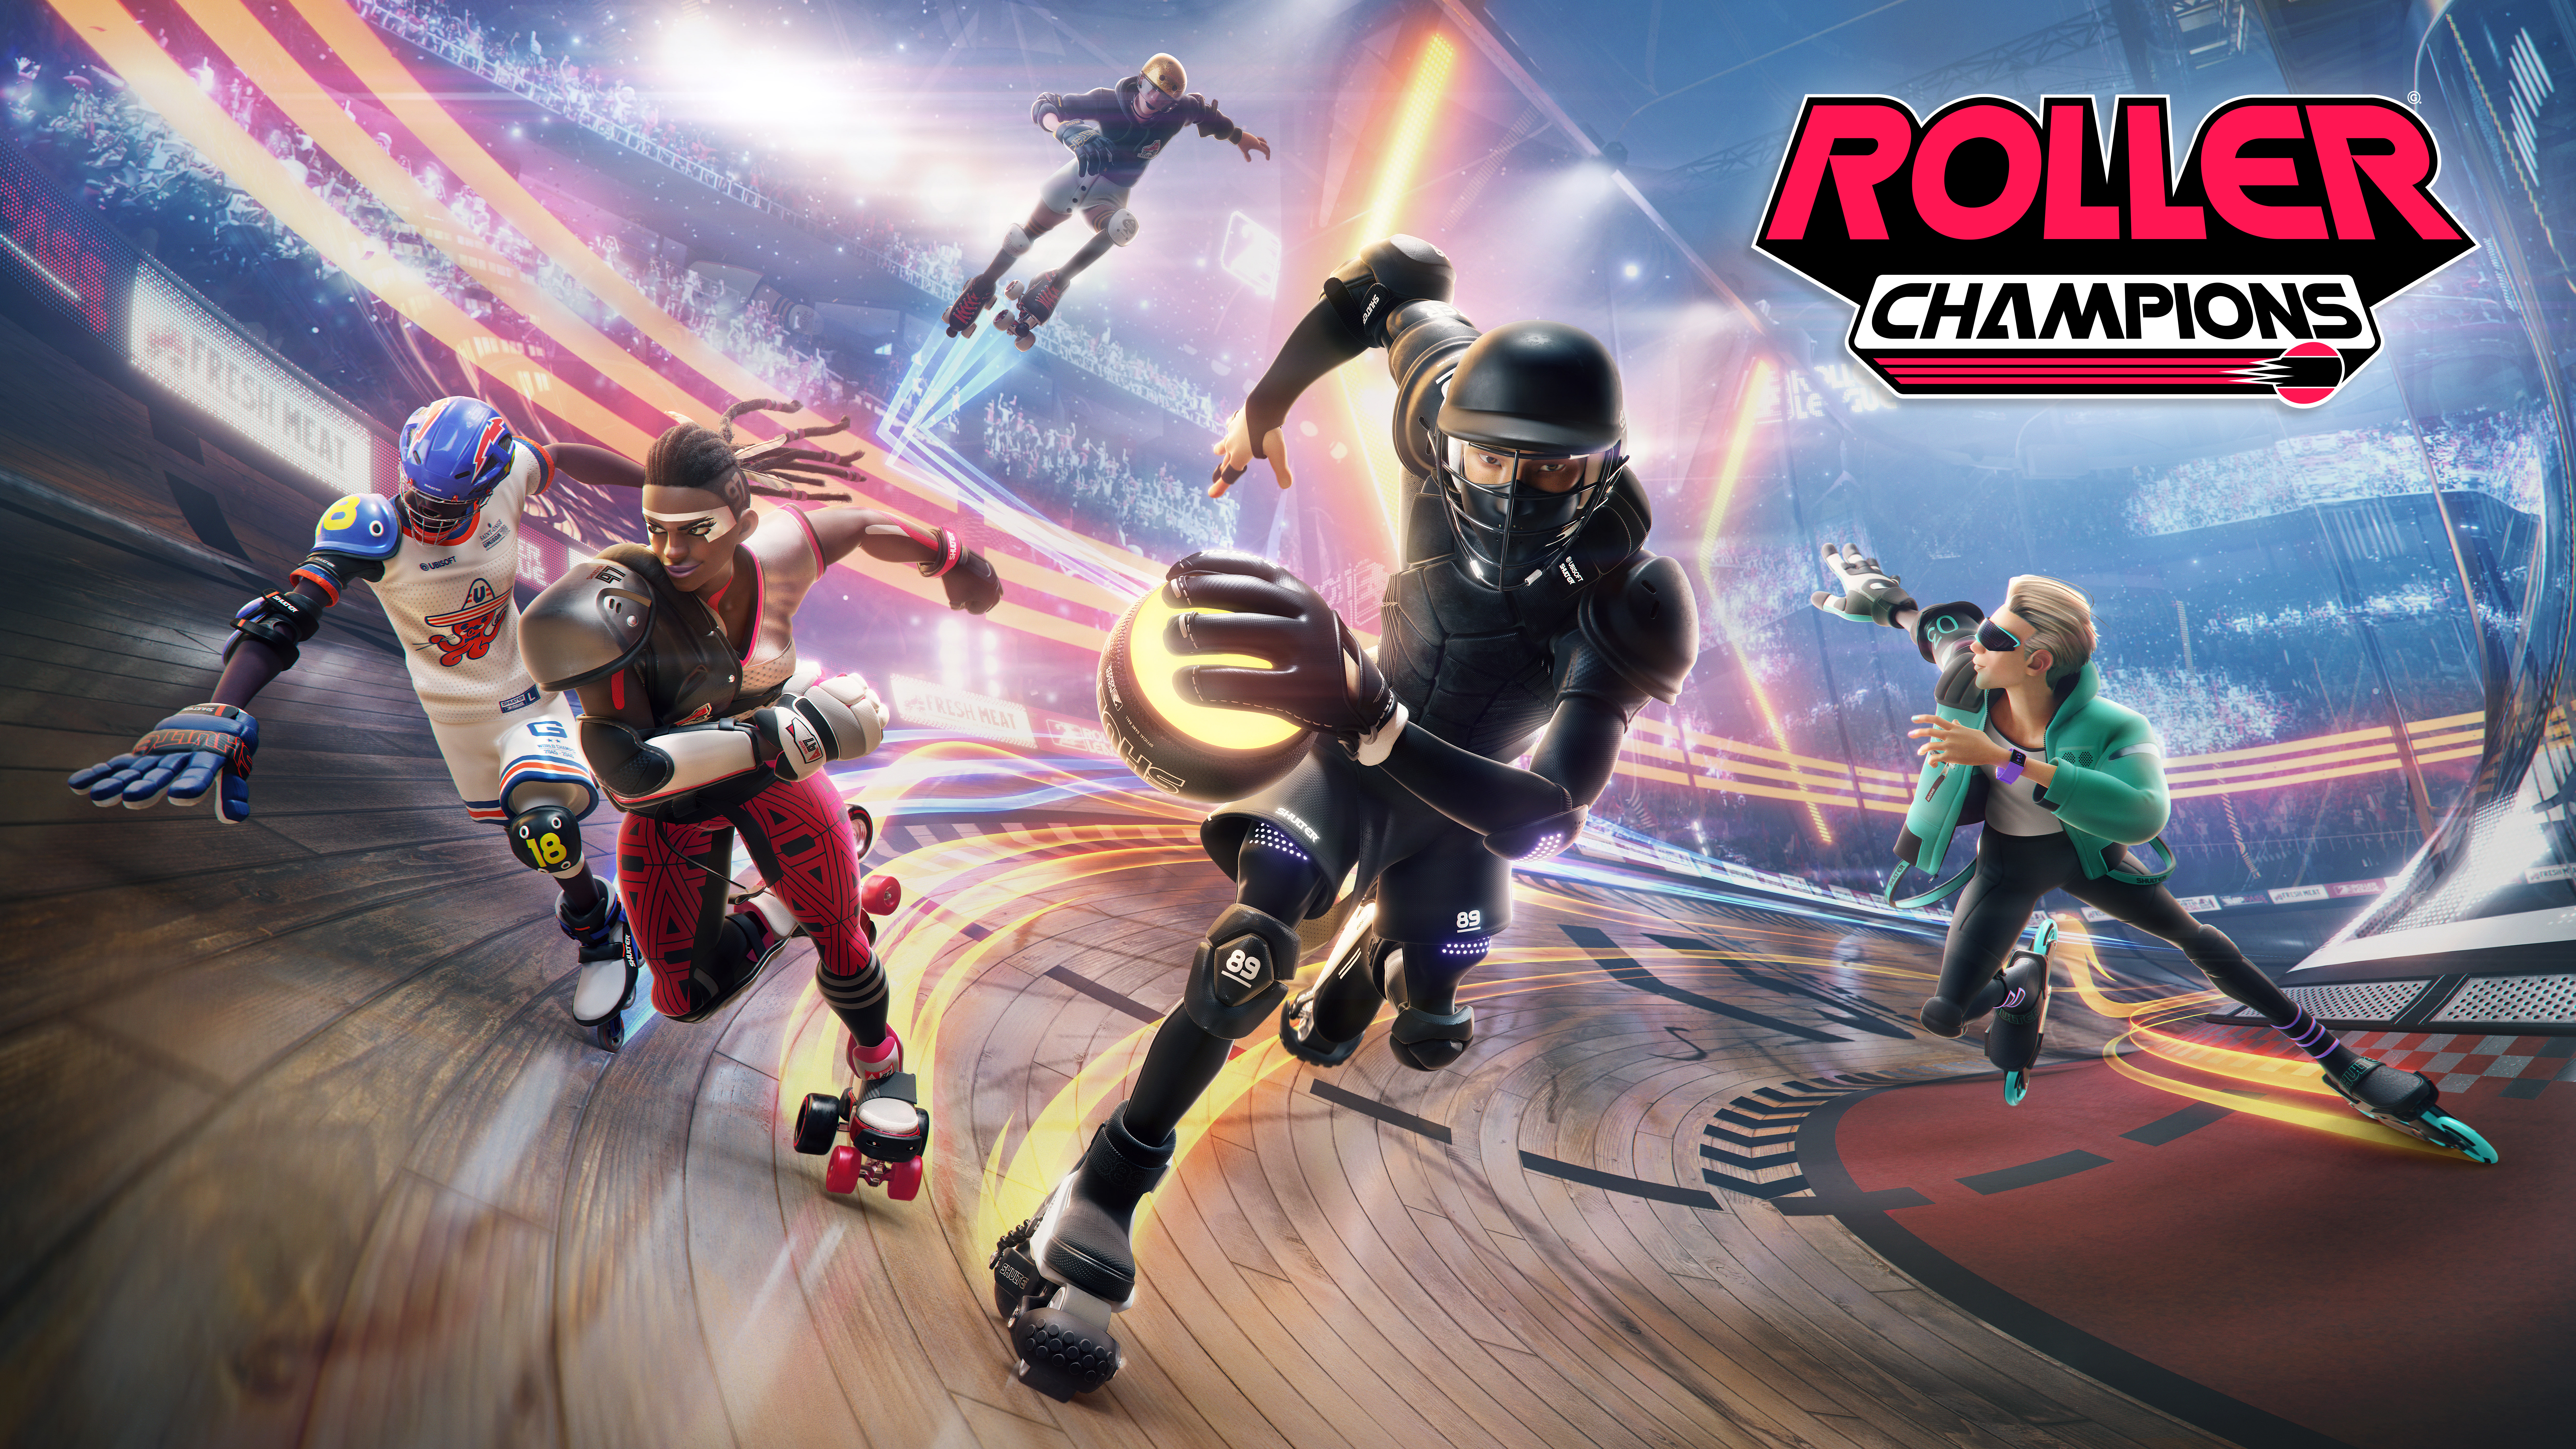 Video Game Roller Champions HD Wallpaper | Background Image